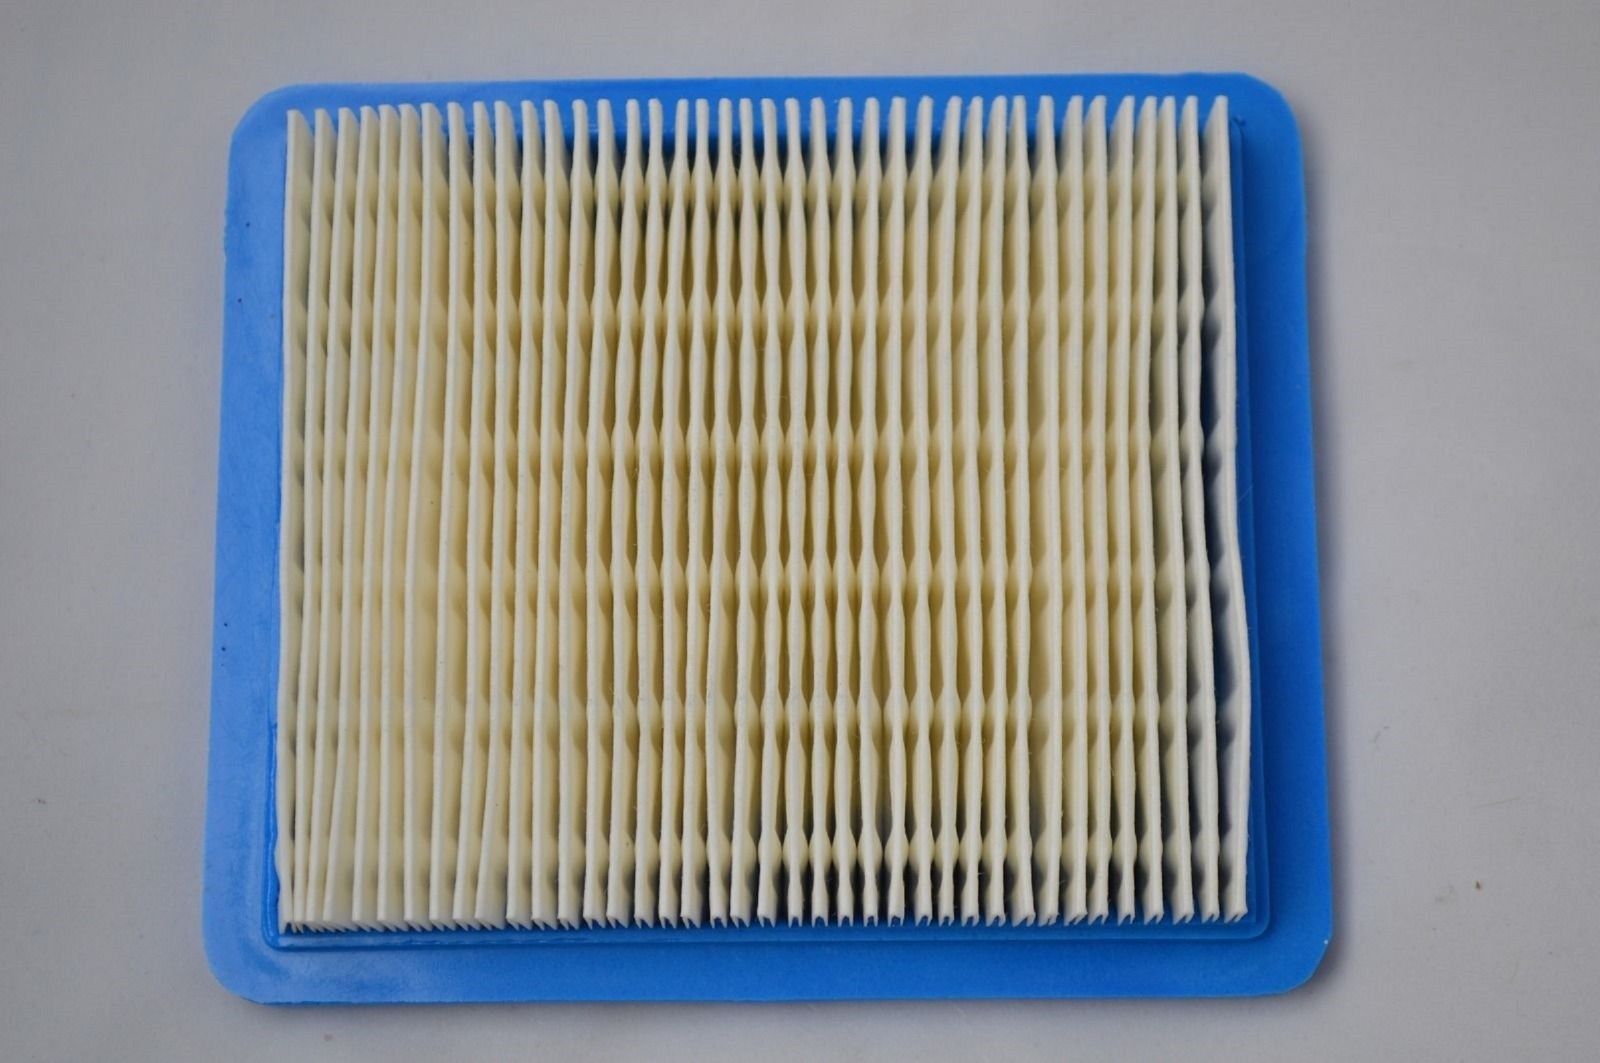 AIR FILTER FITS B&S AND FITS HONDA FITS ARIENS 21529800 - $4.89